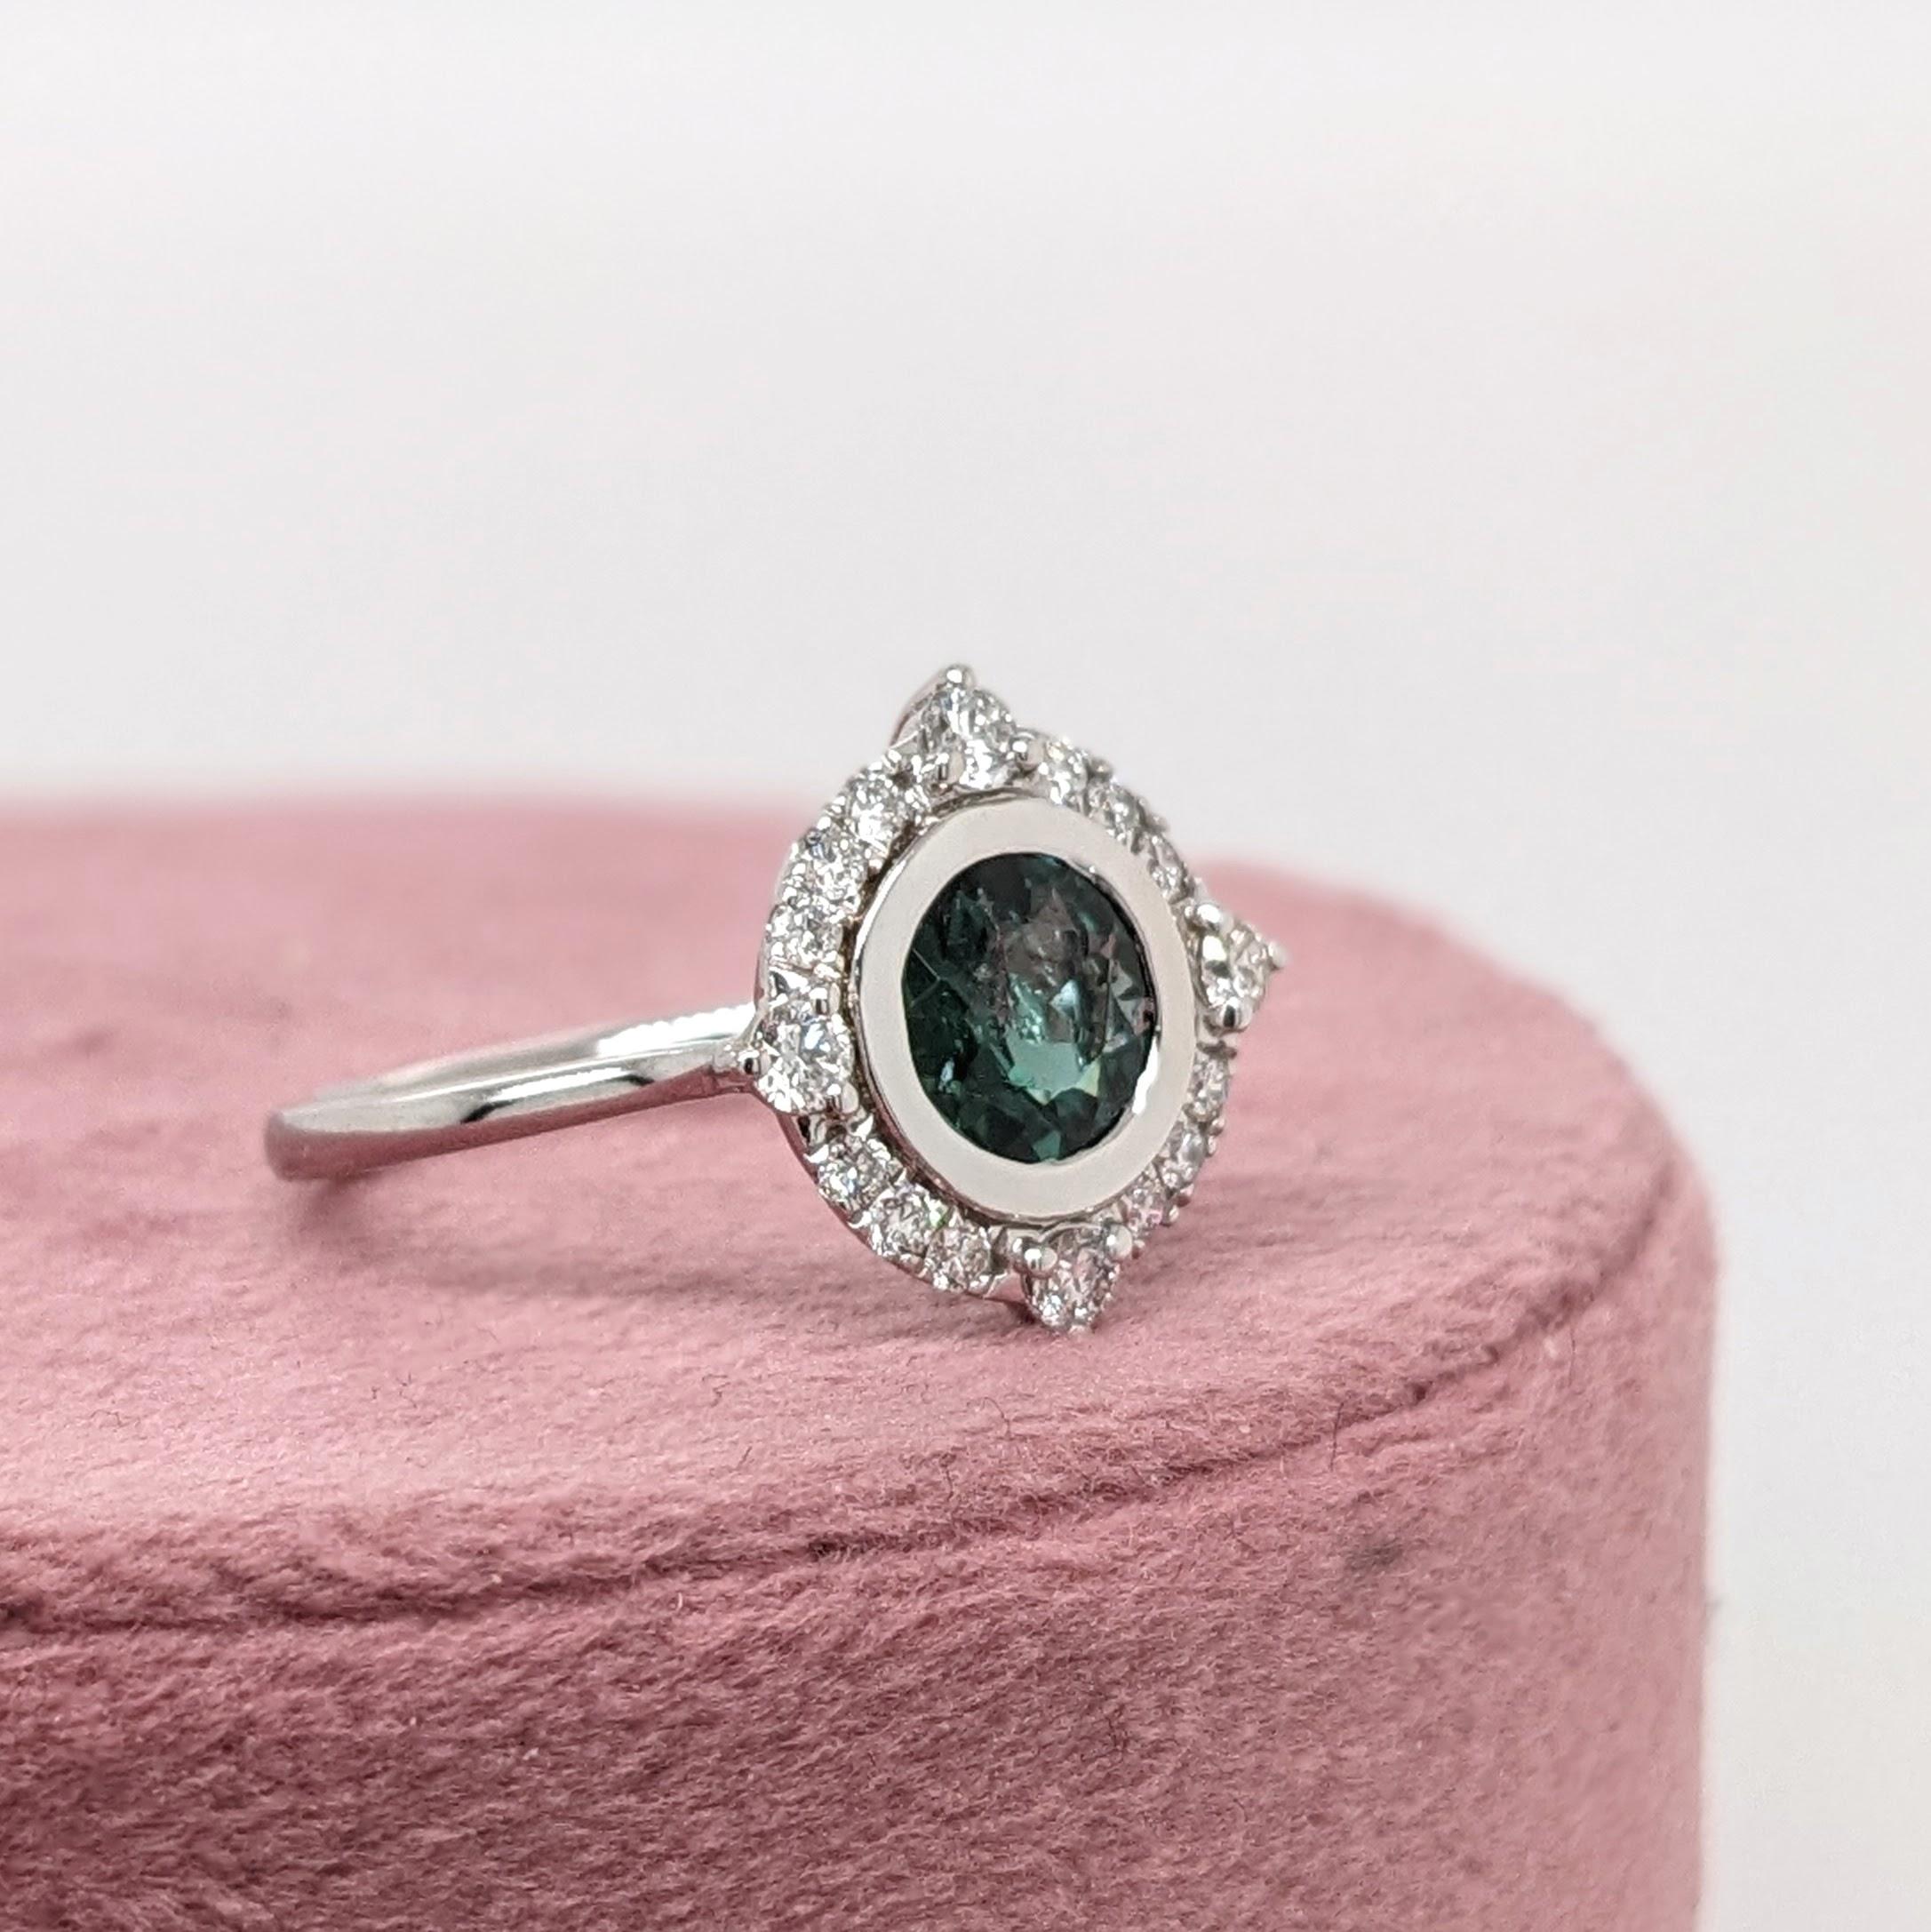 1.14ct Indicolite Tourmaline Ring w Diamond Halo in 14K White Gold Round 7mm In New Condition For Sale In Columbus, OH